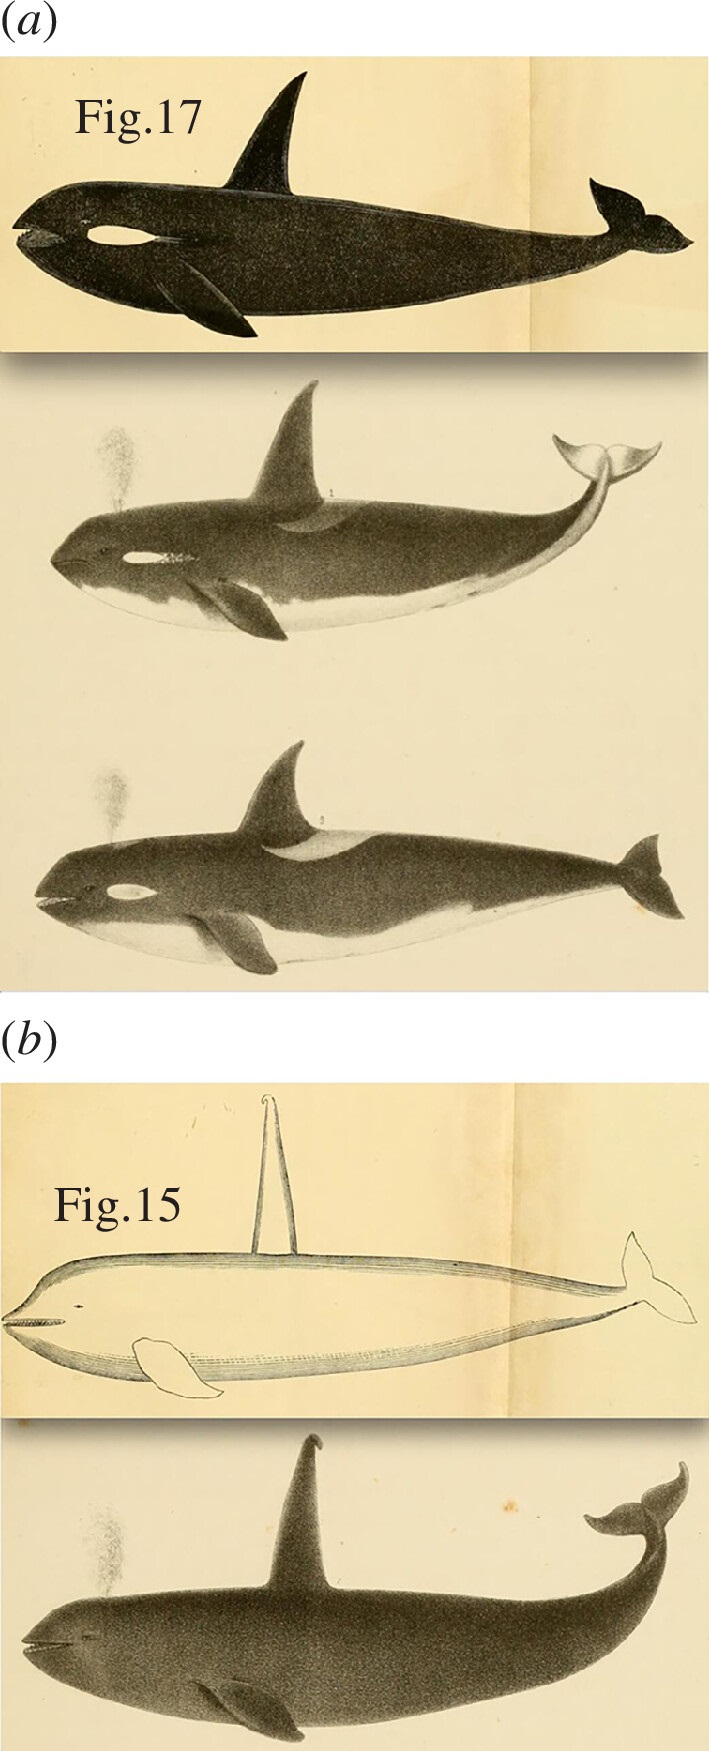 Five illustrations of killer whale stacked on top of one another. Each depiction shows a different orca on profile facing the left. The first animal is almost completely black, with a sharp long dorsal fin and small blob of white on its cheek. The second orca has a white belly, the same white blob on the cheek and its tail is curved upwards at the end. The third orca is shorter and has a smaller dorsal fin and a larger white patch behind it. The fourth orca is completely white, has a much taller dorsal fin with a slightly bent tip. The style of this drawing looks different from that of the others. The final orca is a completely black version of the fourth one and also has a bent tip.